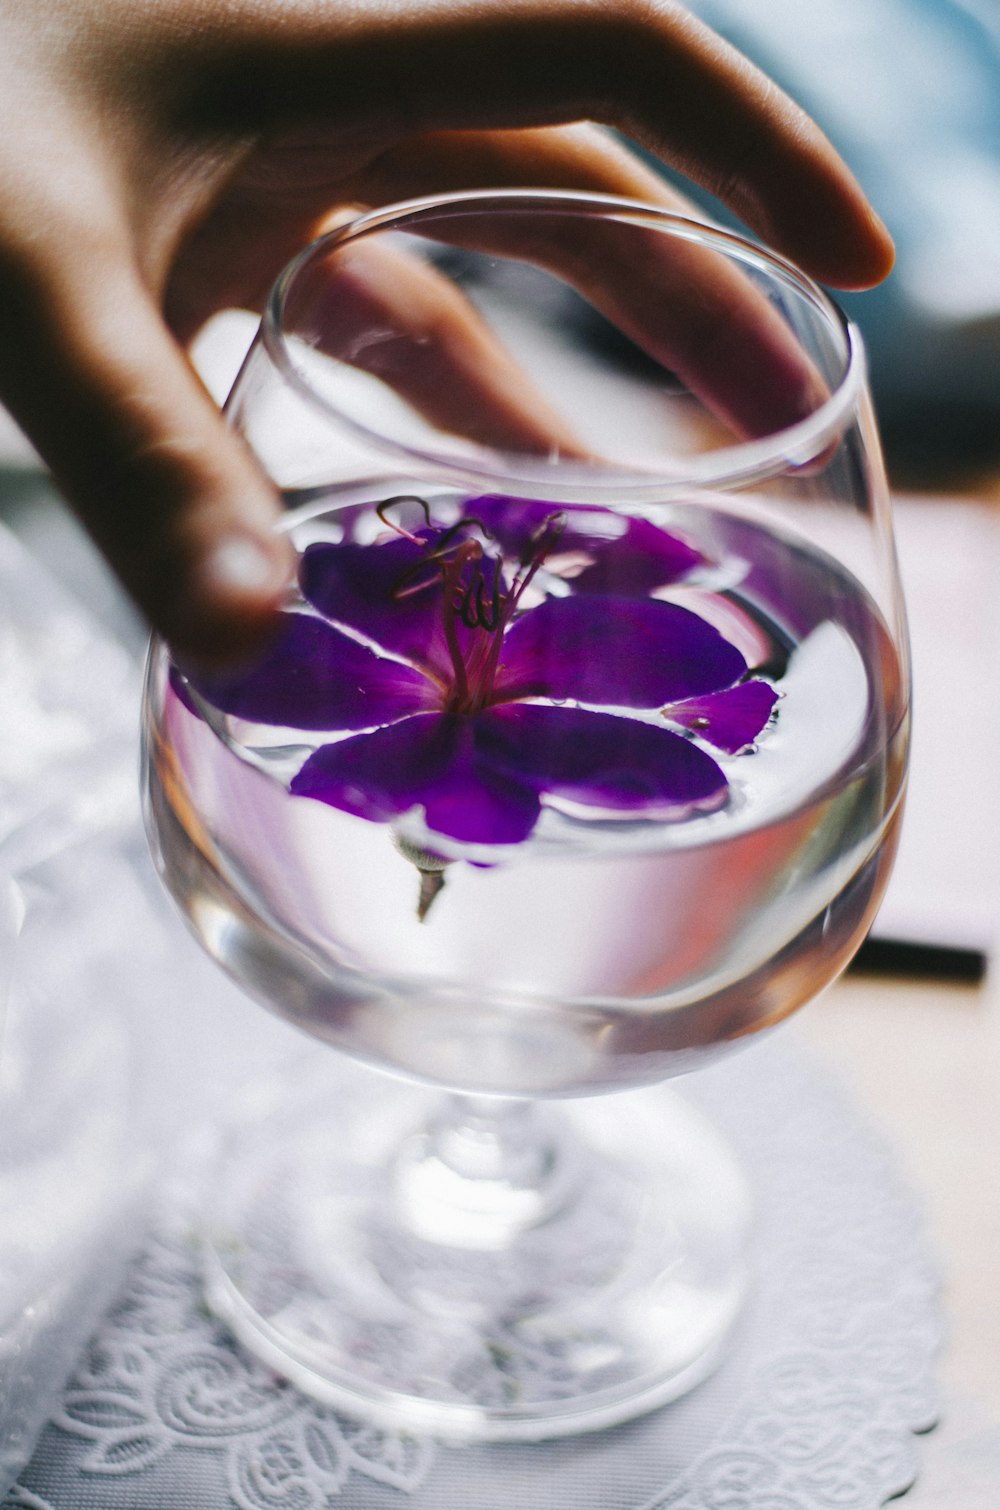 a person holding a purple flower in a wine glass